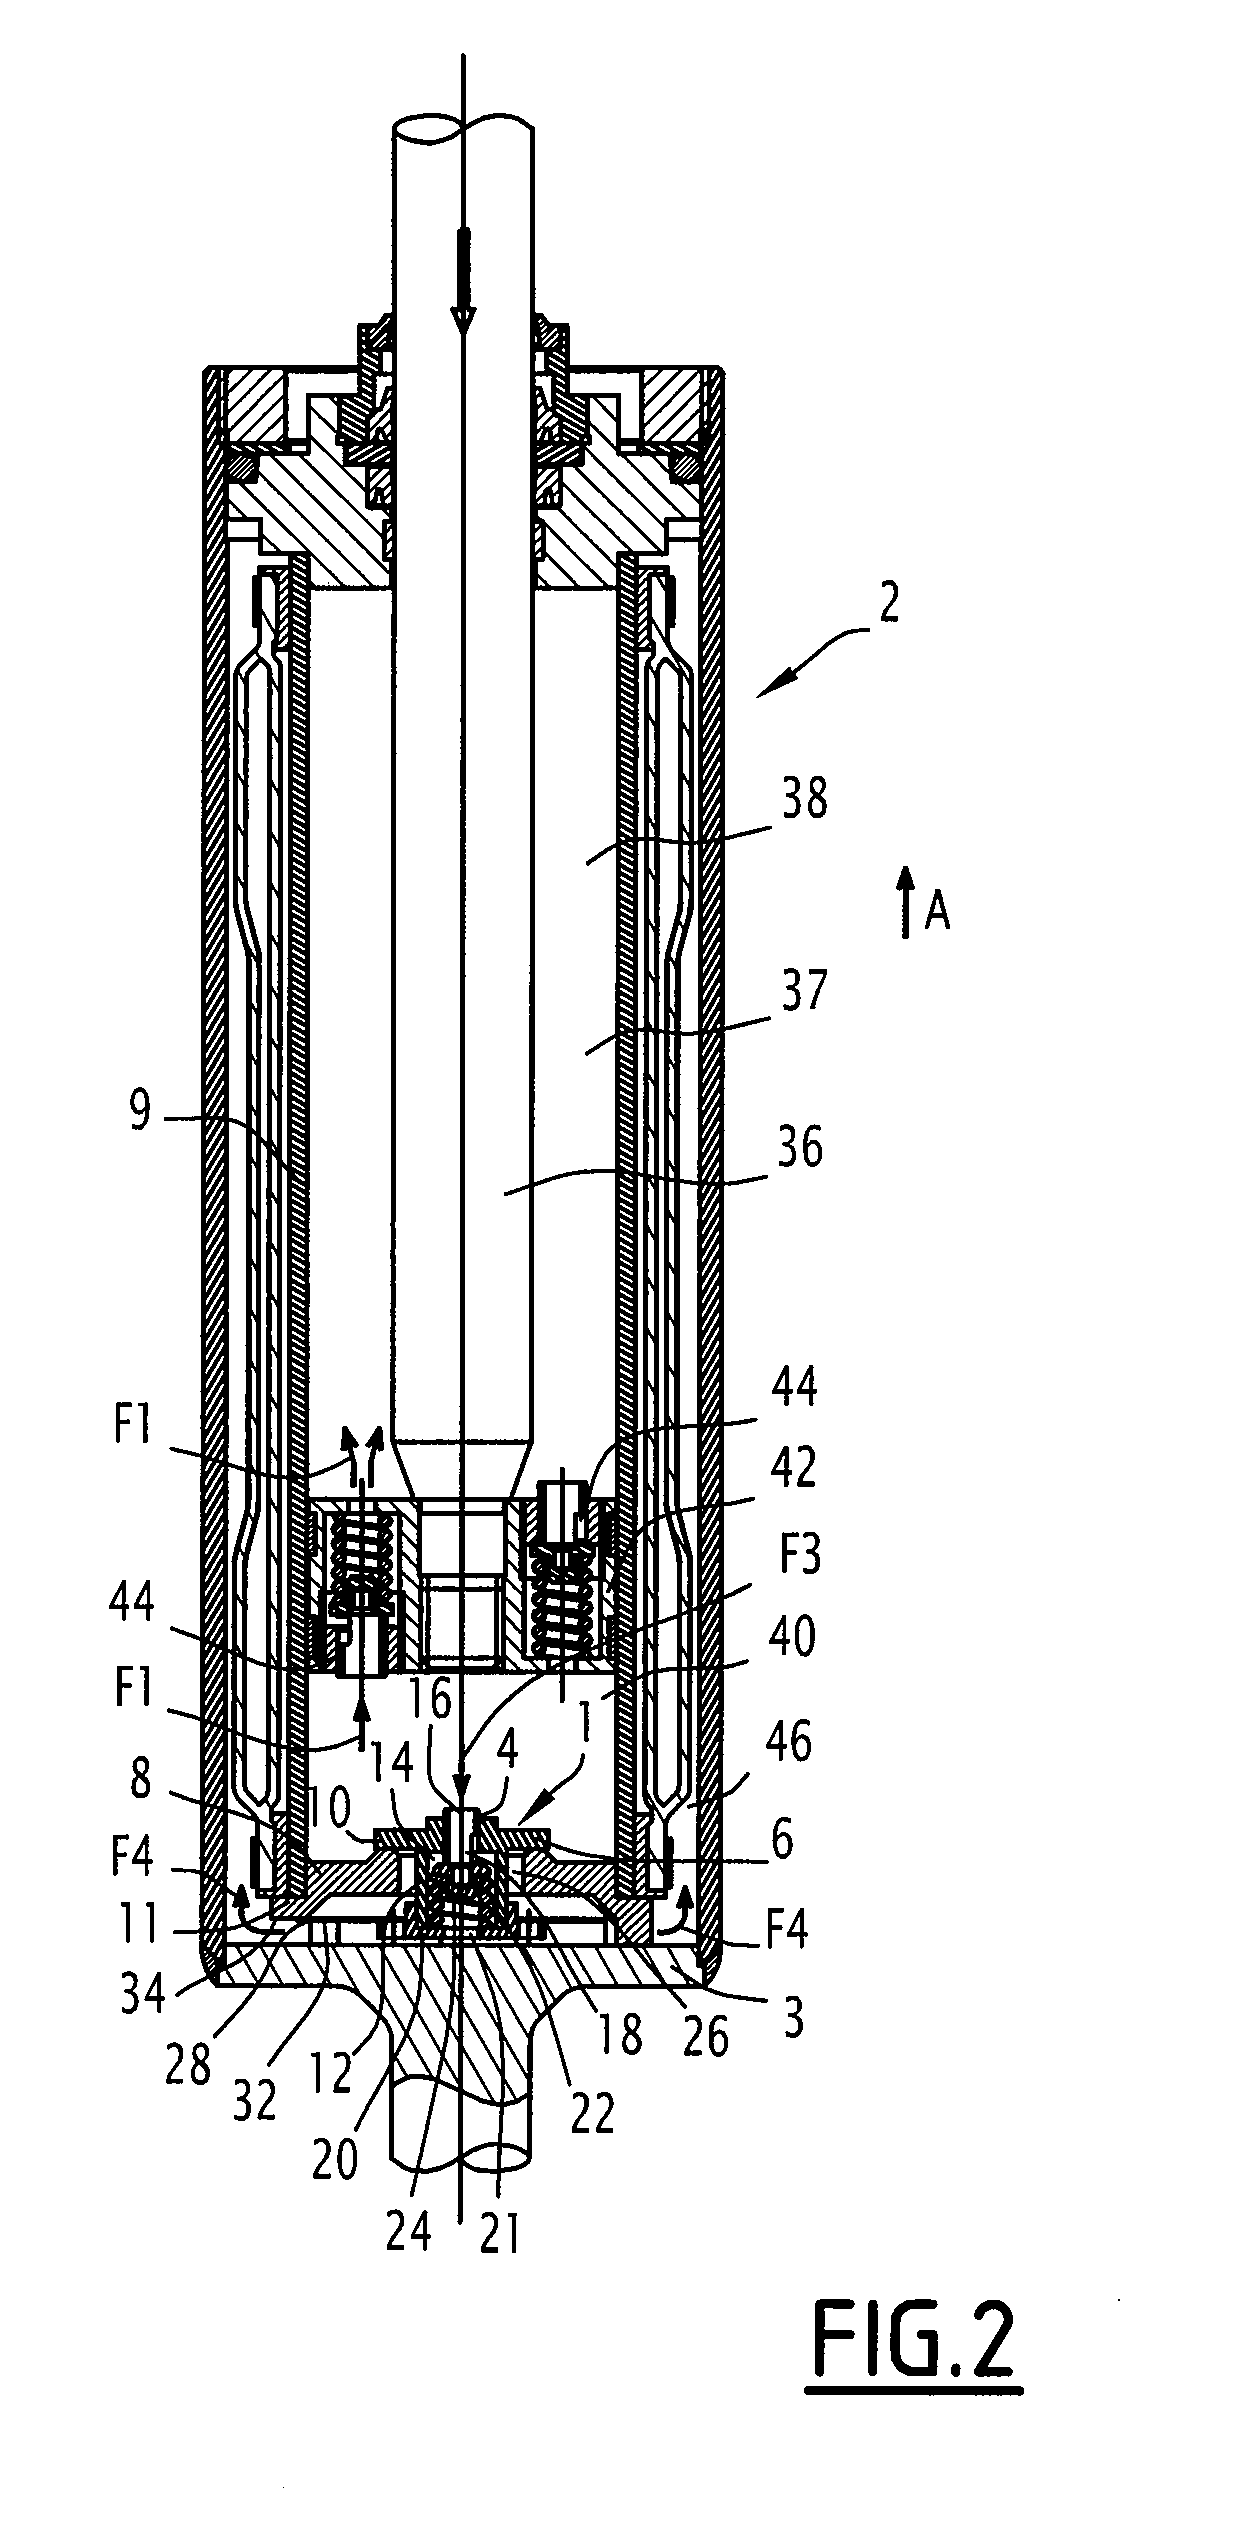 Valve assembly for damper between a lower chamber and a compensation chamber in the damper